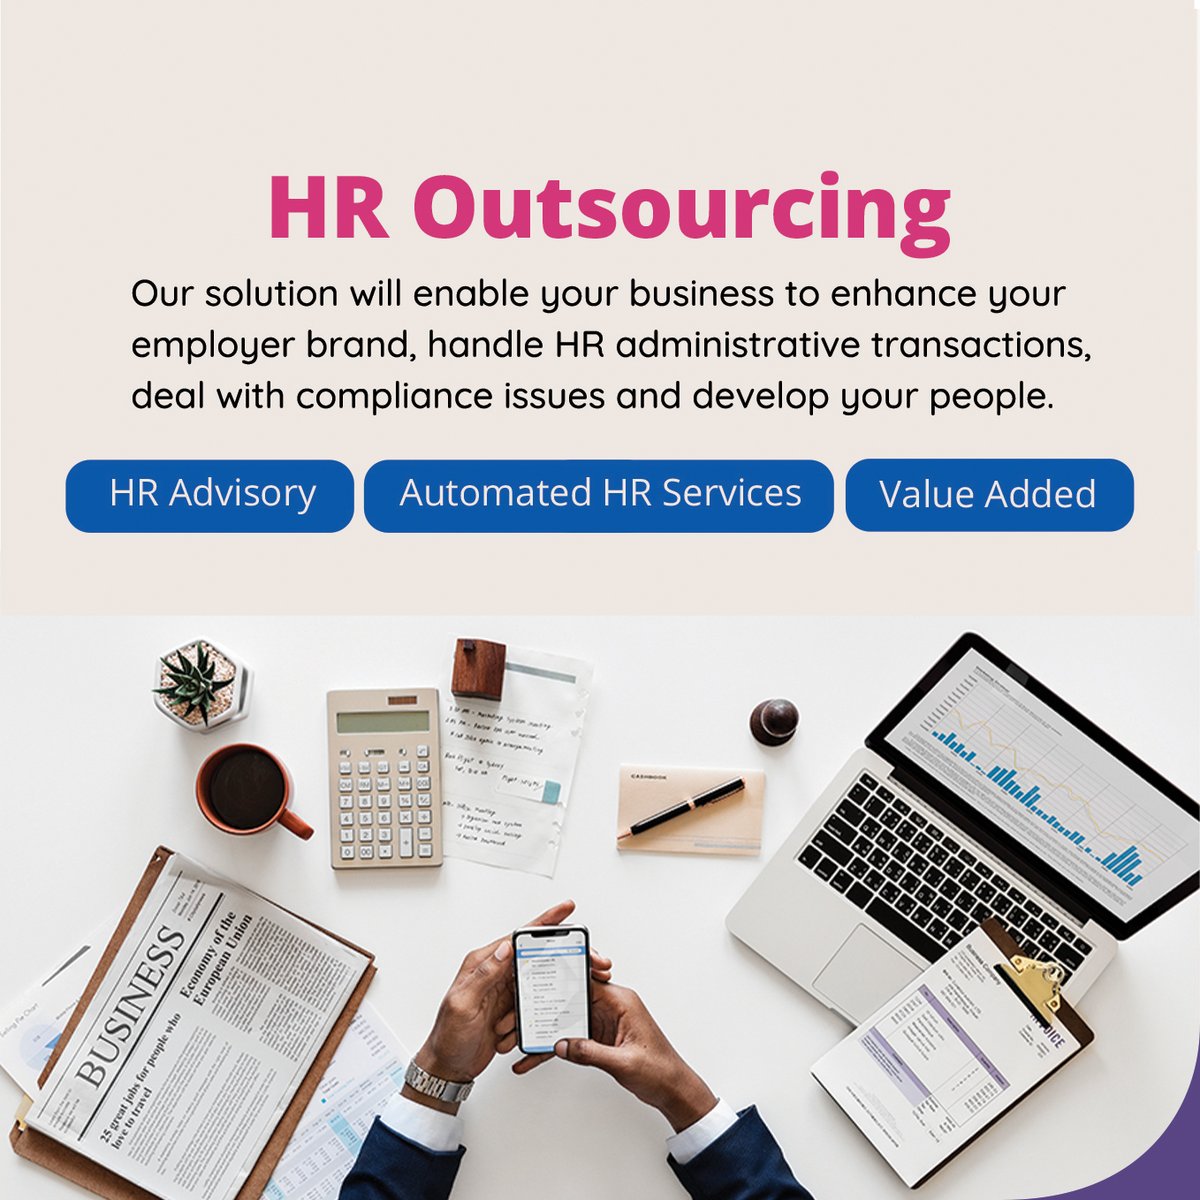 Introducing Our Complete HR Solution! 
🌟 Boost your Employer Brand 
📊 Streamline HR Administrative Transactions 
📝 Ensure Compliance with Ease 
🌱 Develop and Empower Your People

Let us take care of your HR worries, 🌱💪
#SMEHRSupport #BusinessGrowth #HRoutsourcing